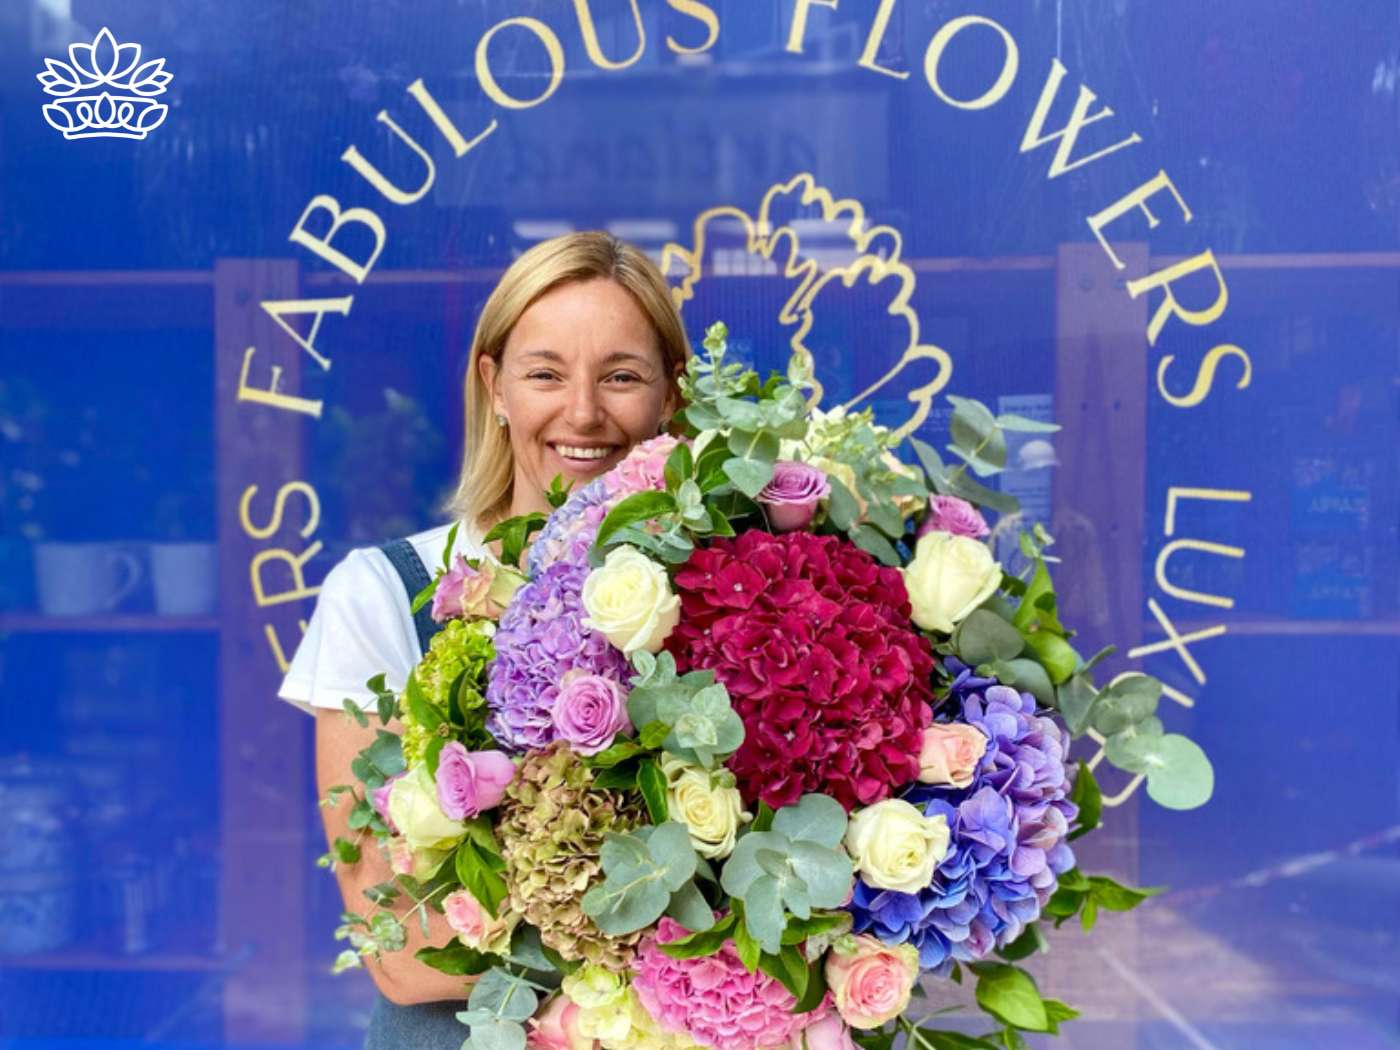 Beaming florist with an abundant congratulation flowers arrangement of hydrangeas, roses, and lush greens, symbolizing the joyful spirit of the Congratulations Flower and Gift Collection—Fabulous Flowers and Gifts.